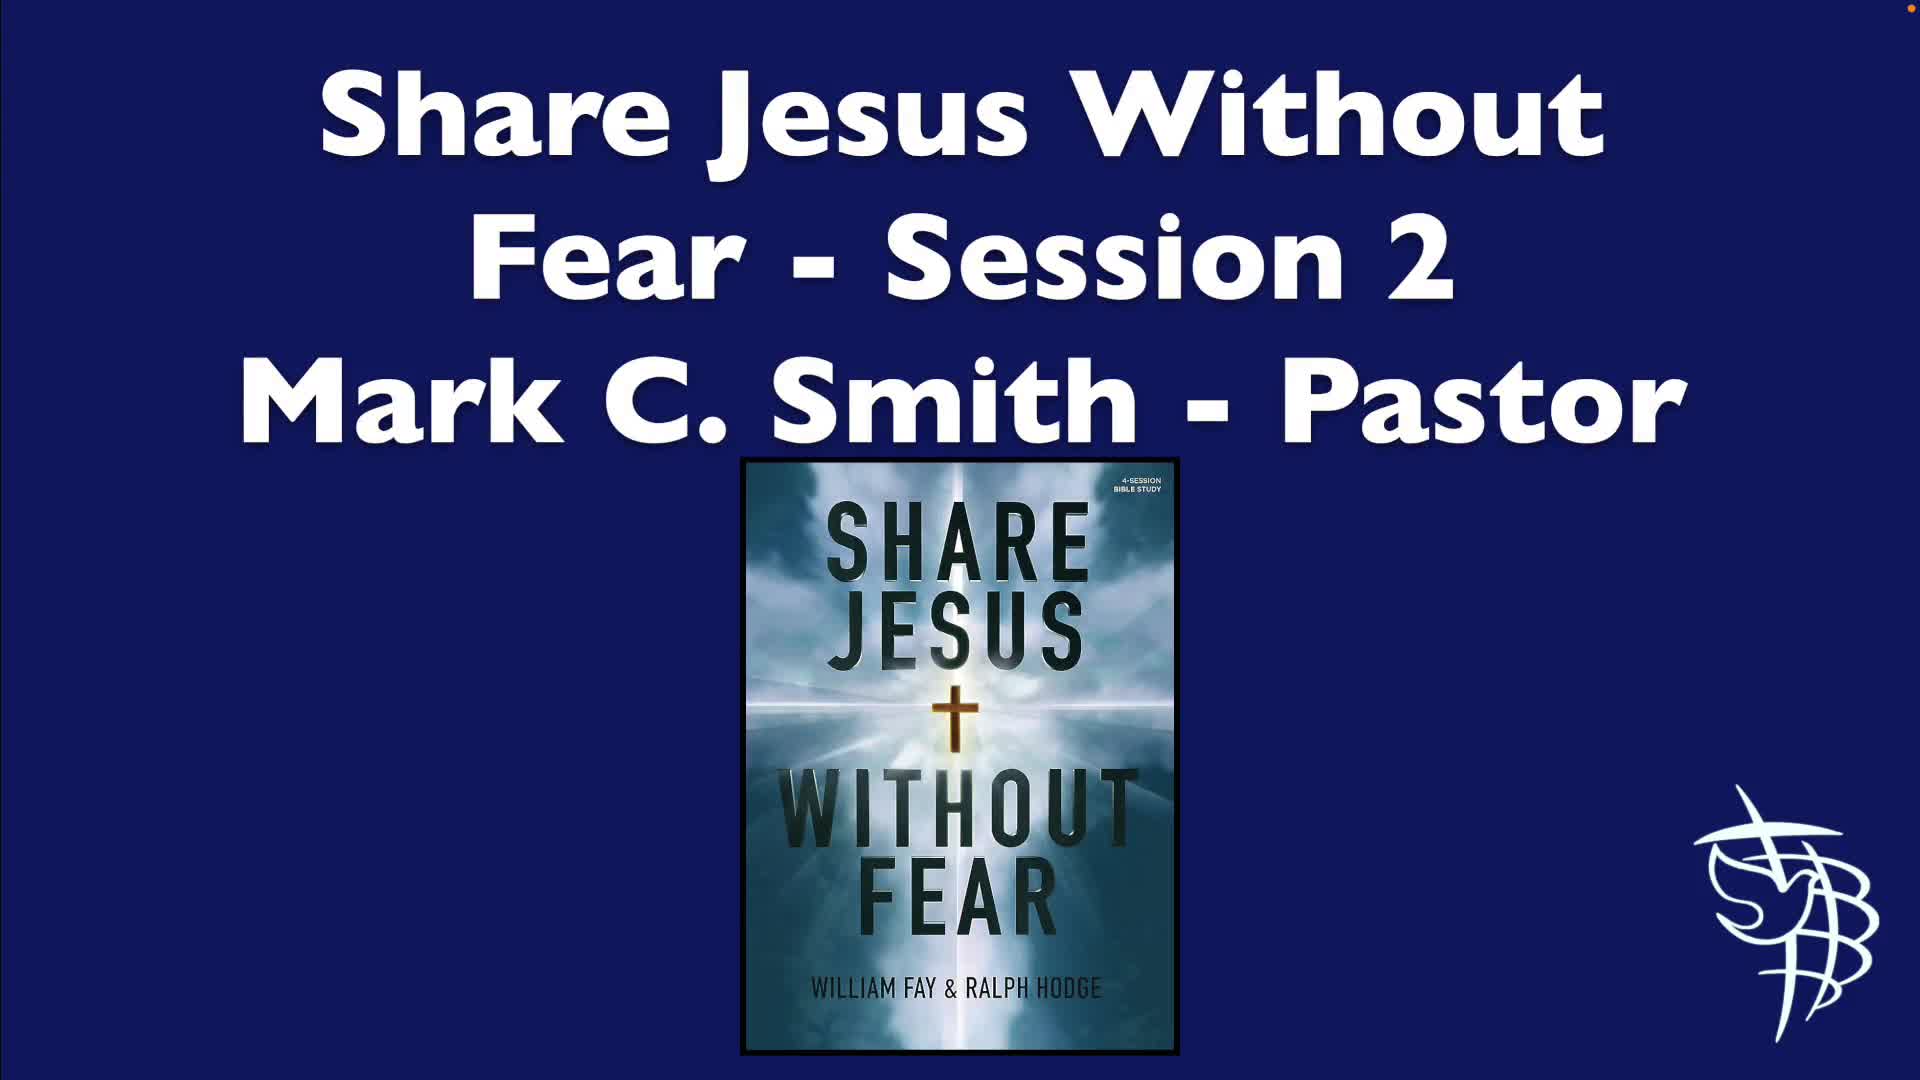 Share Jesus Without Fear - Session 2